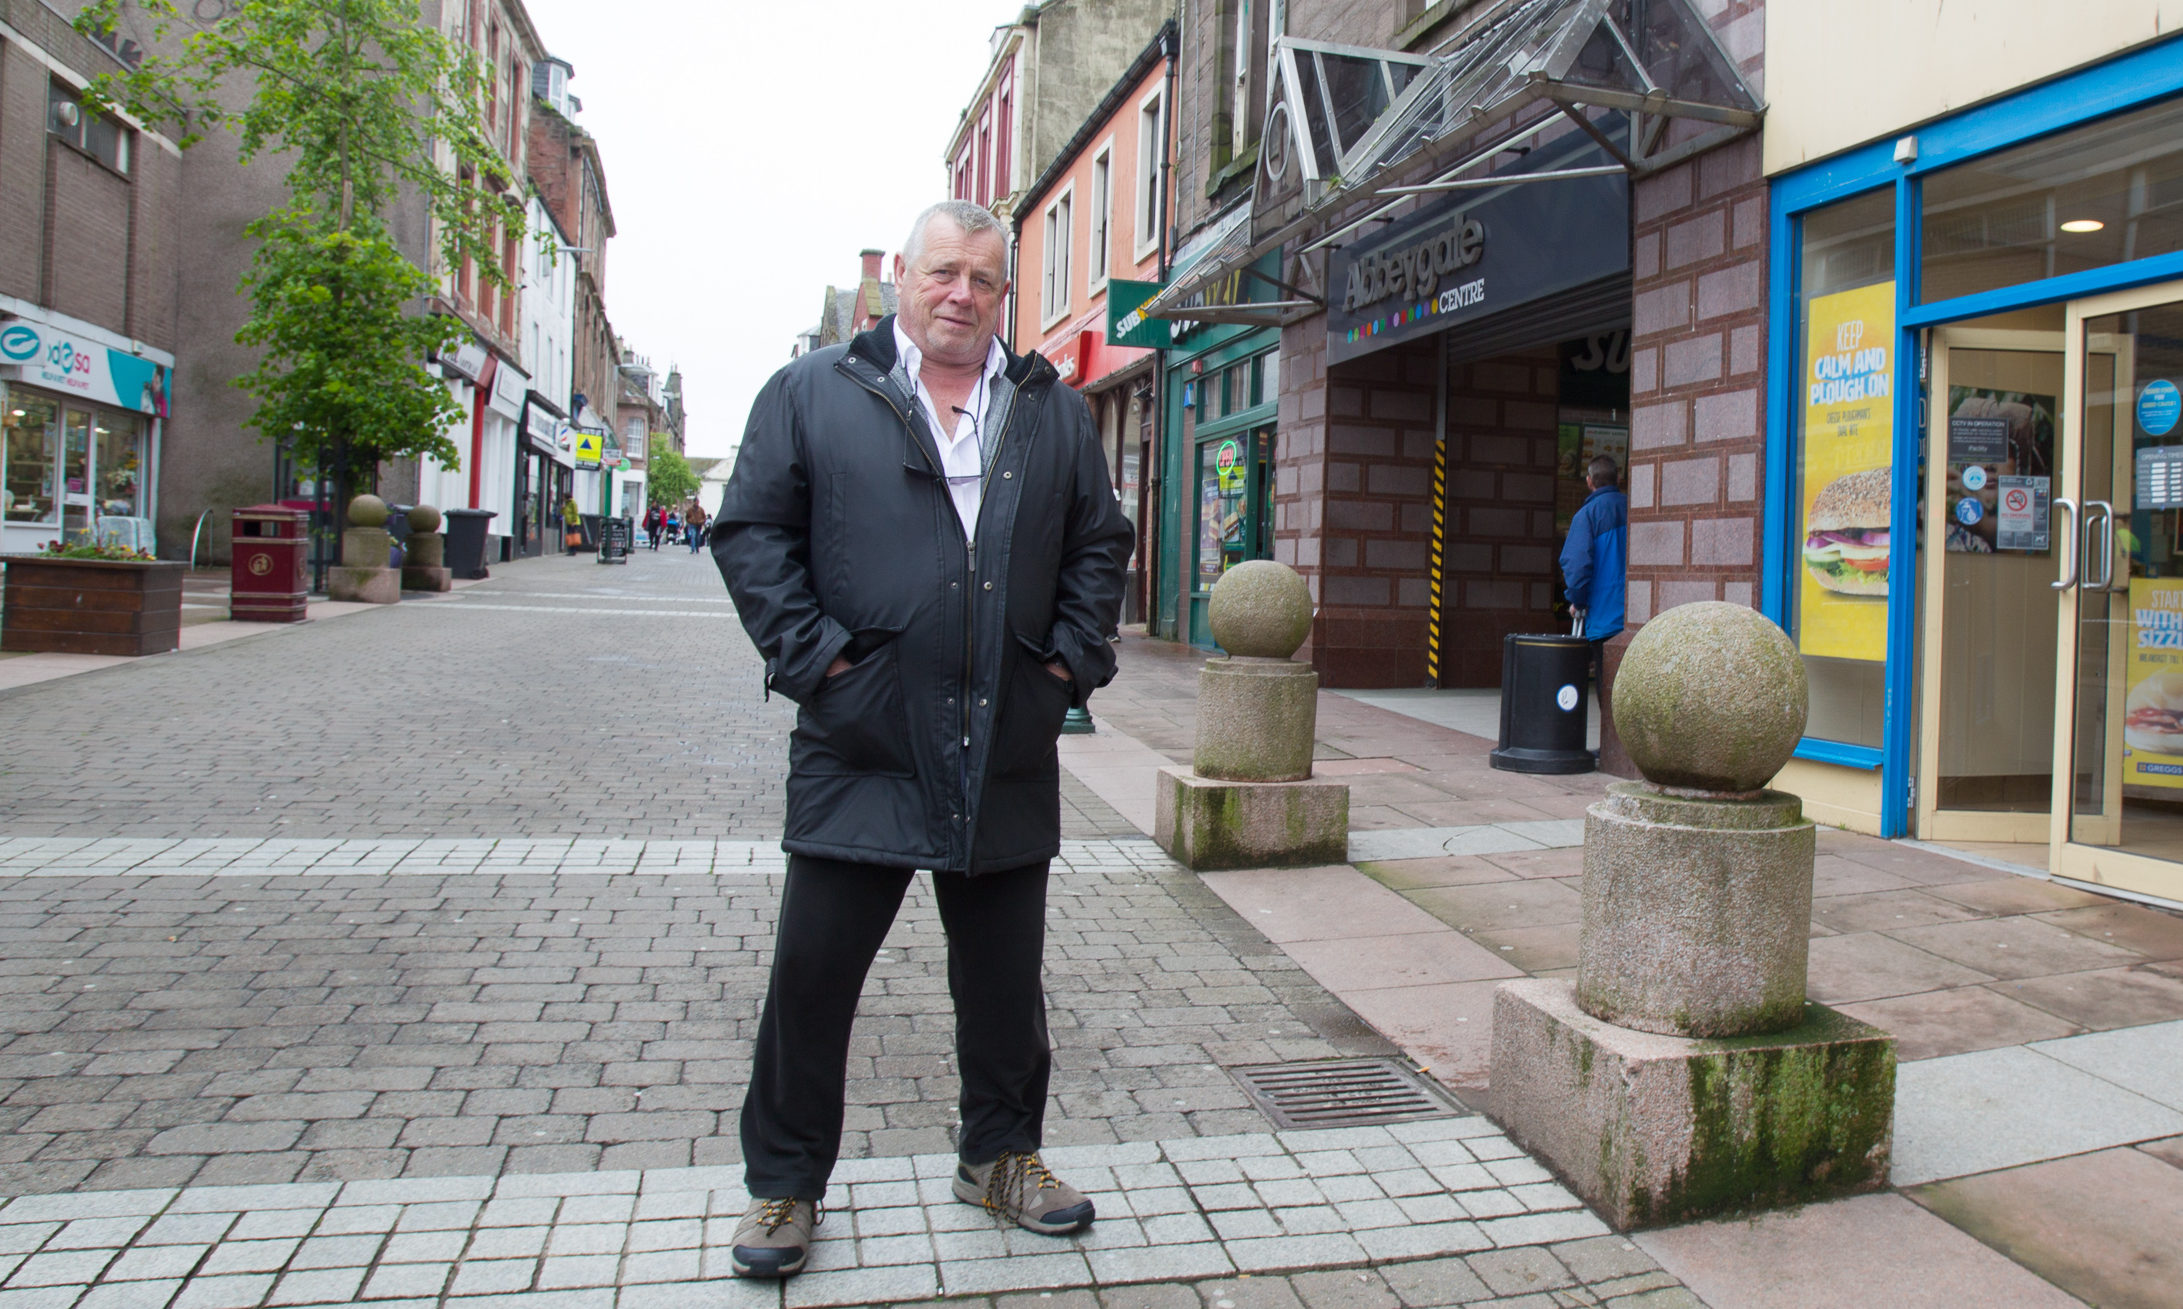 Arbroath businessman Bill Adam has hit out at the state of Arbroath's town centre.